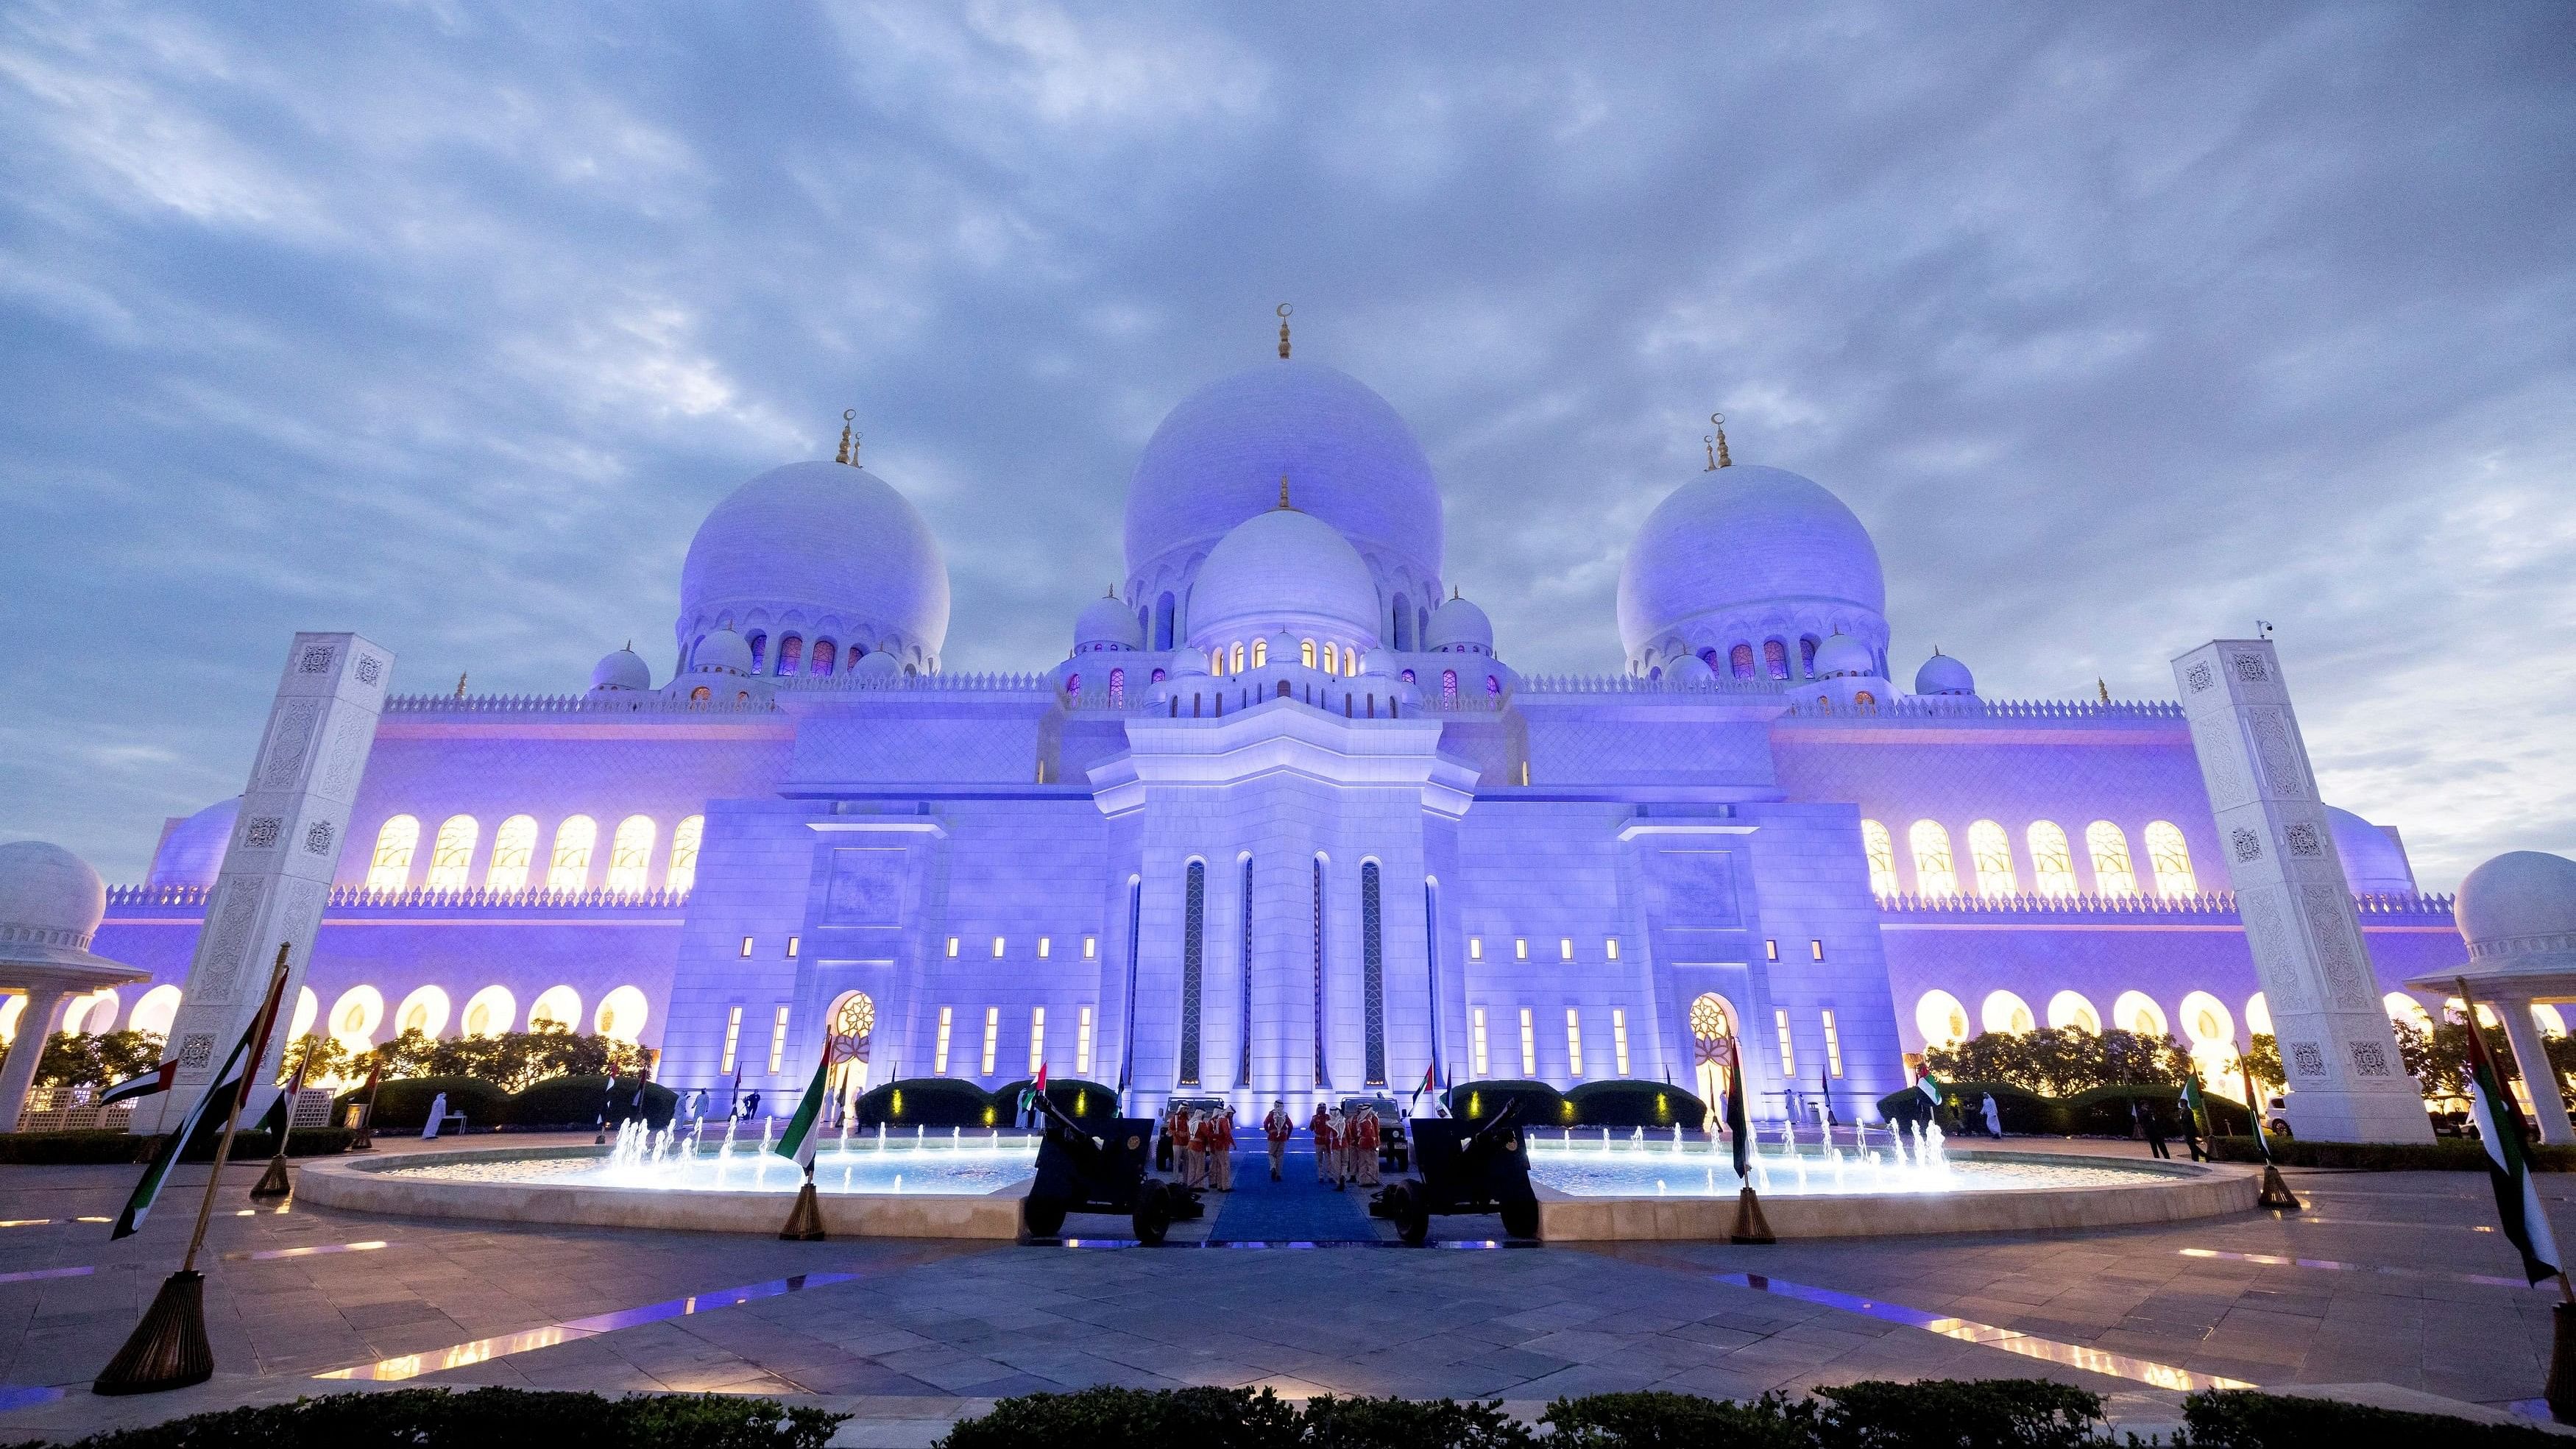 <div class="paragraphs"><p>A view of the Sheikh Zayed Grand Mosque in Abu Dhabi, United Arab Emirates.</p></div>